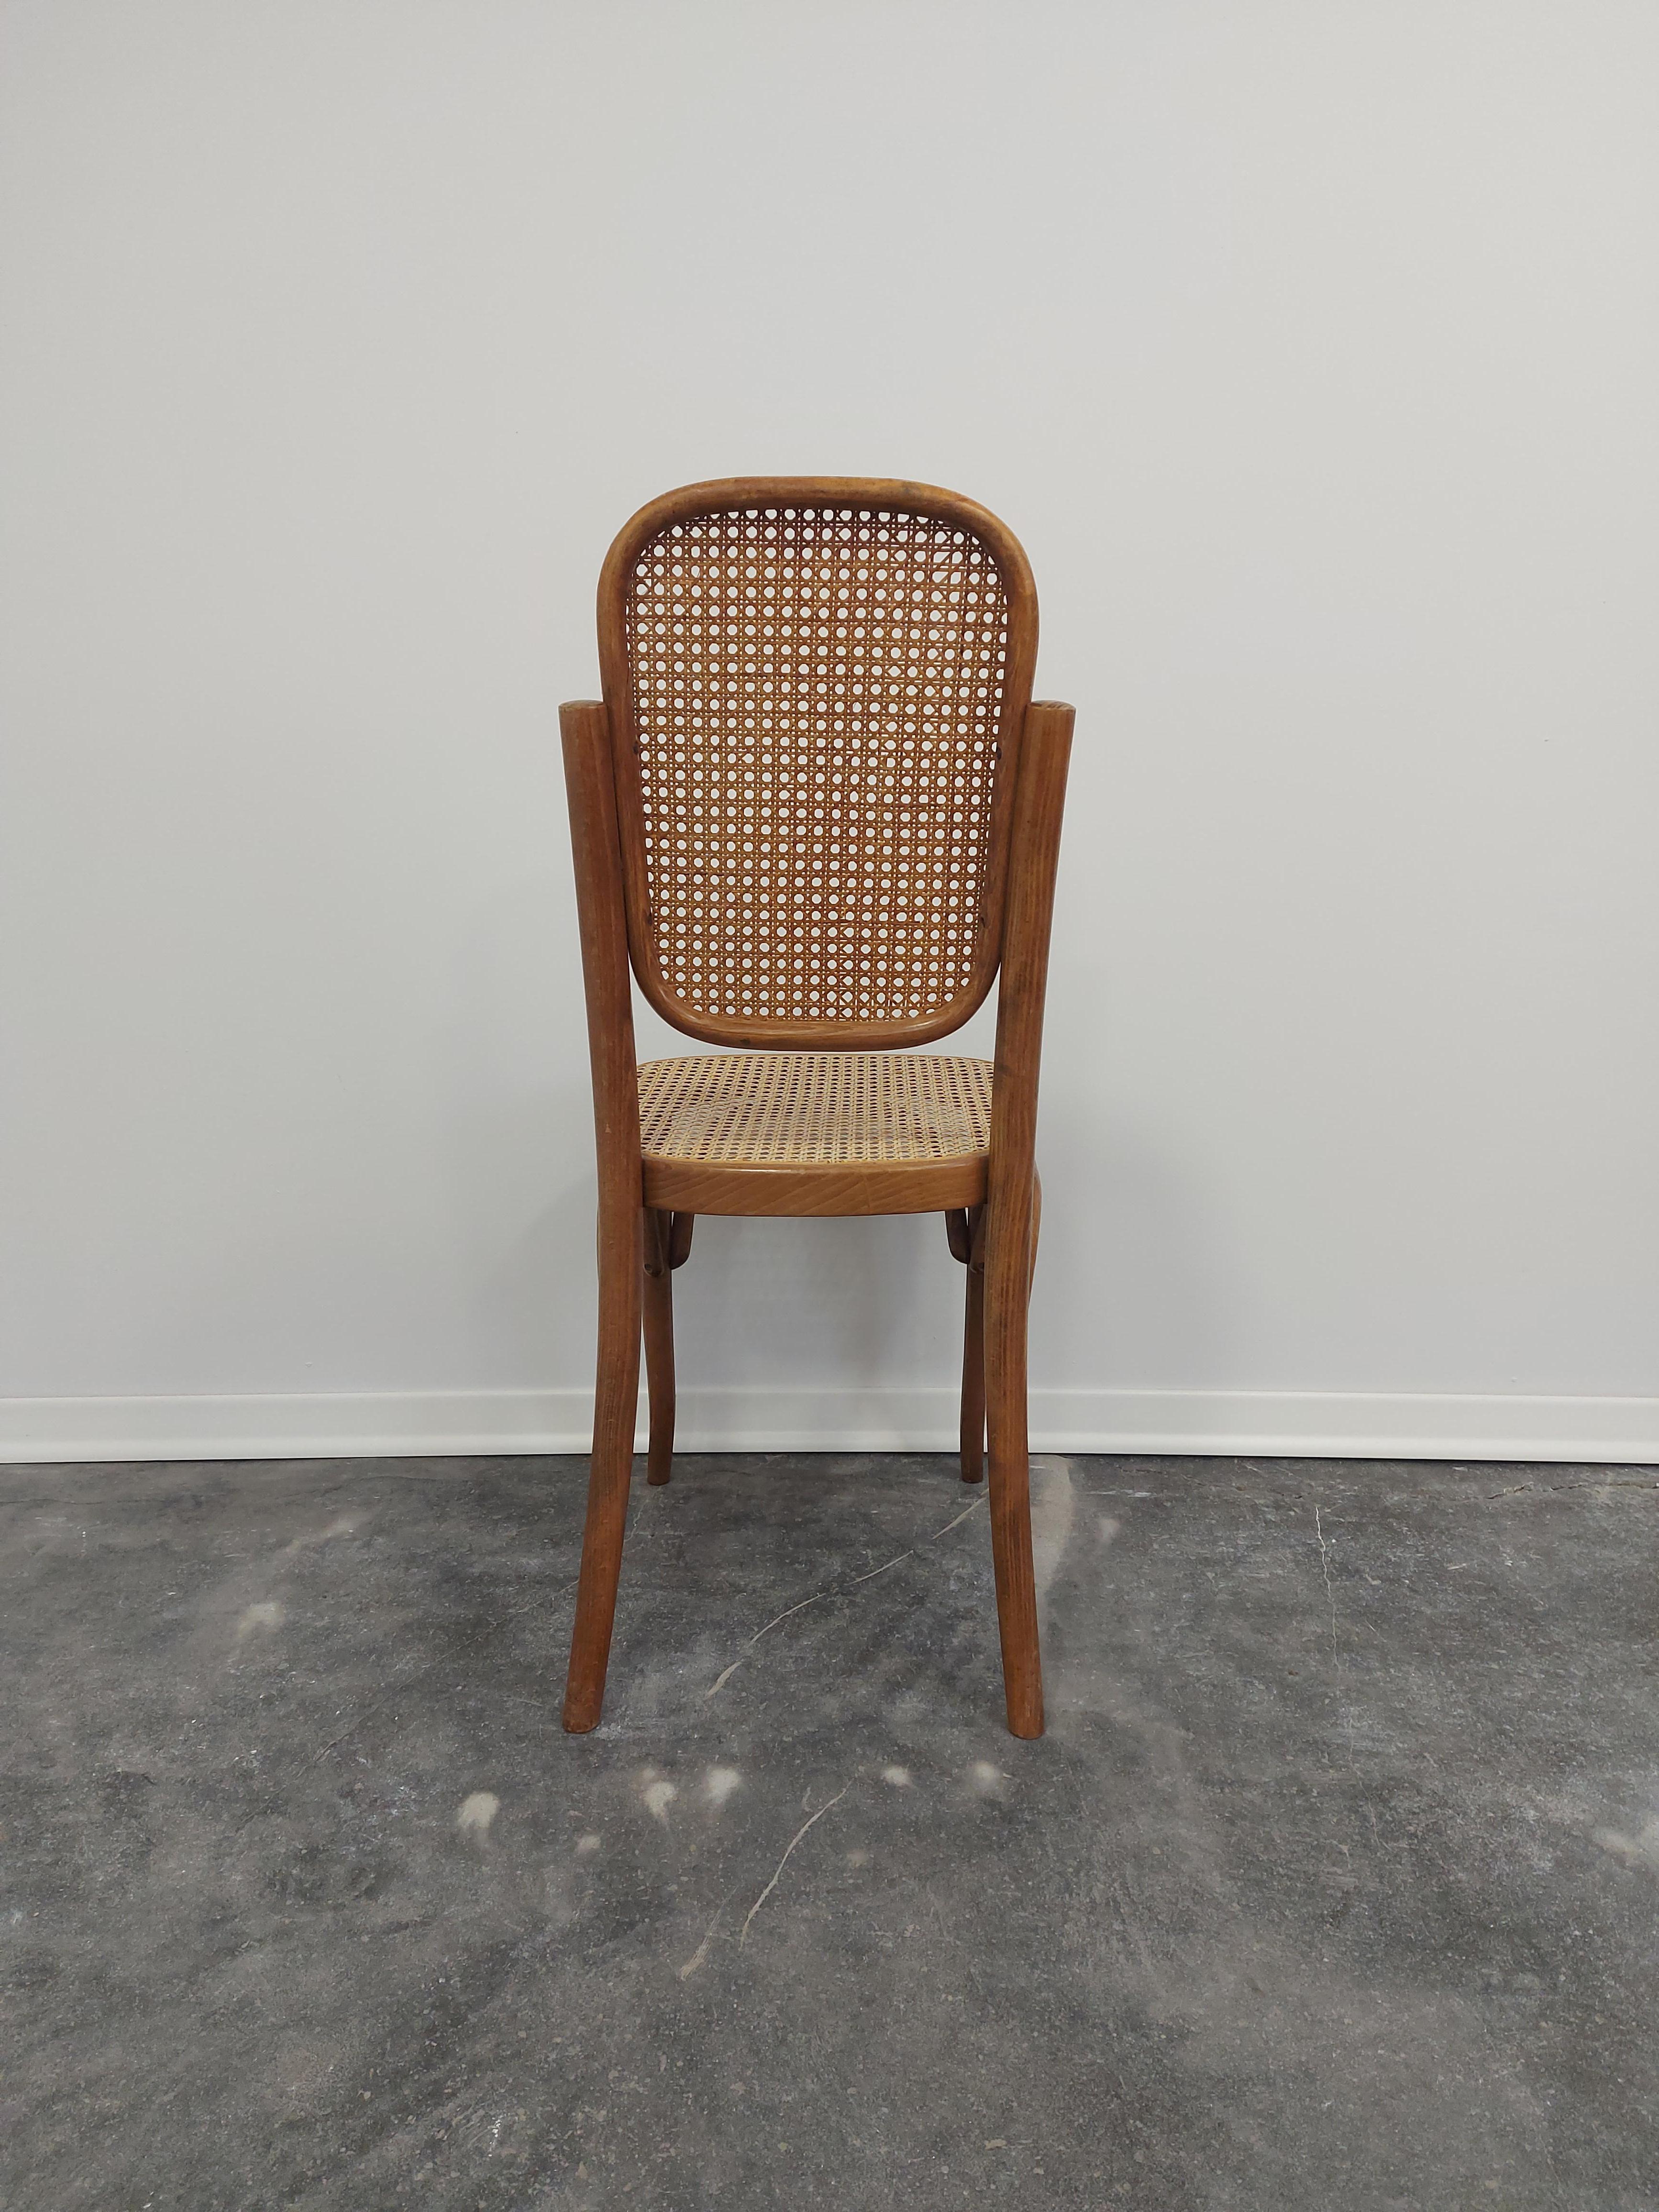 Mid-20th Century Chair, Bentwood Cane, 1960s For Sale